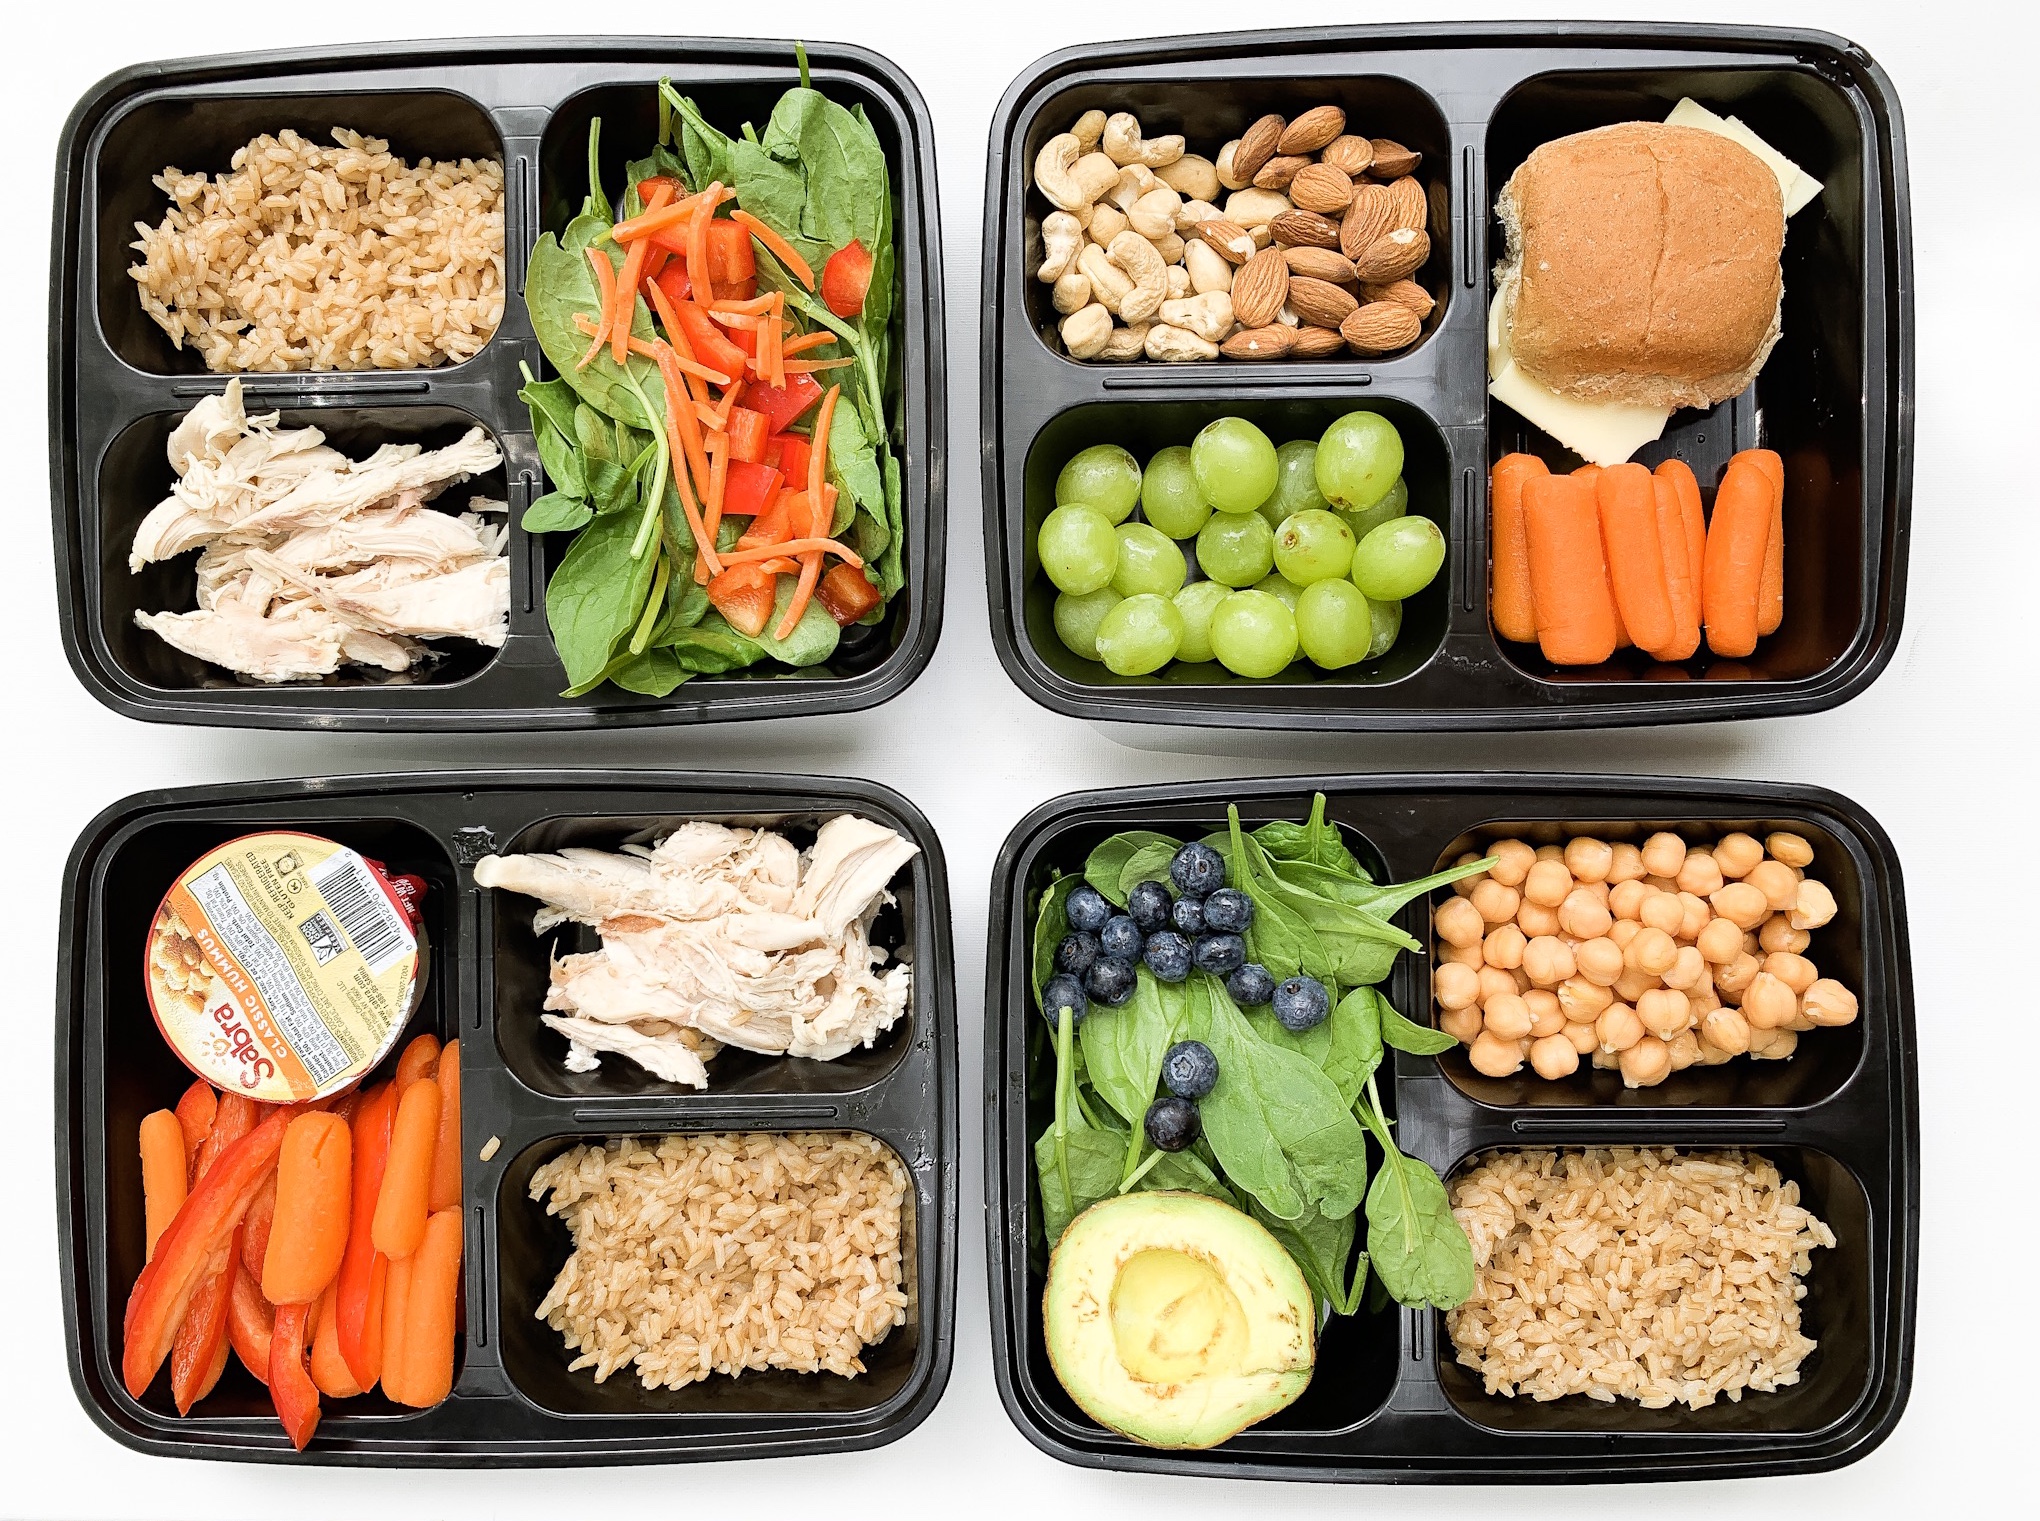 Packing Lunch for Work: Time Saving Tips and Meal Ideas